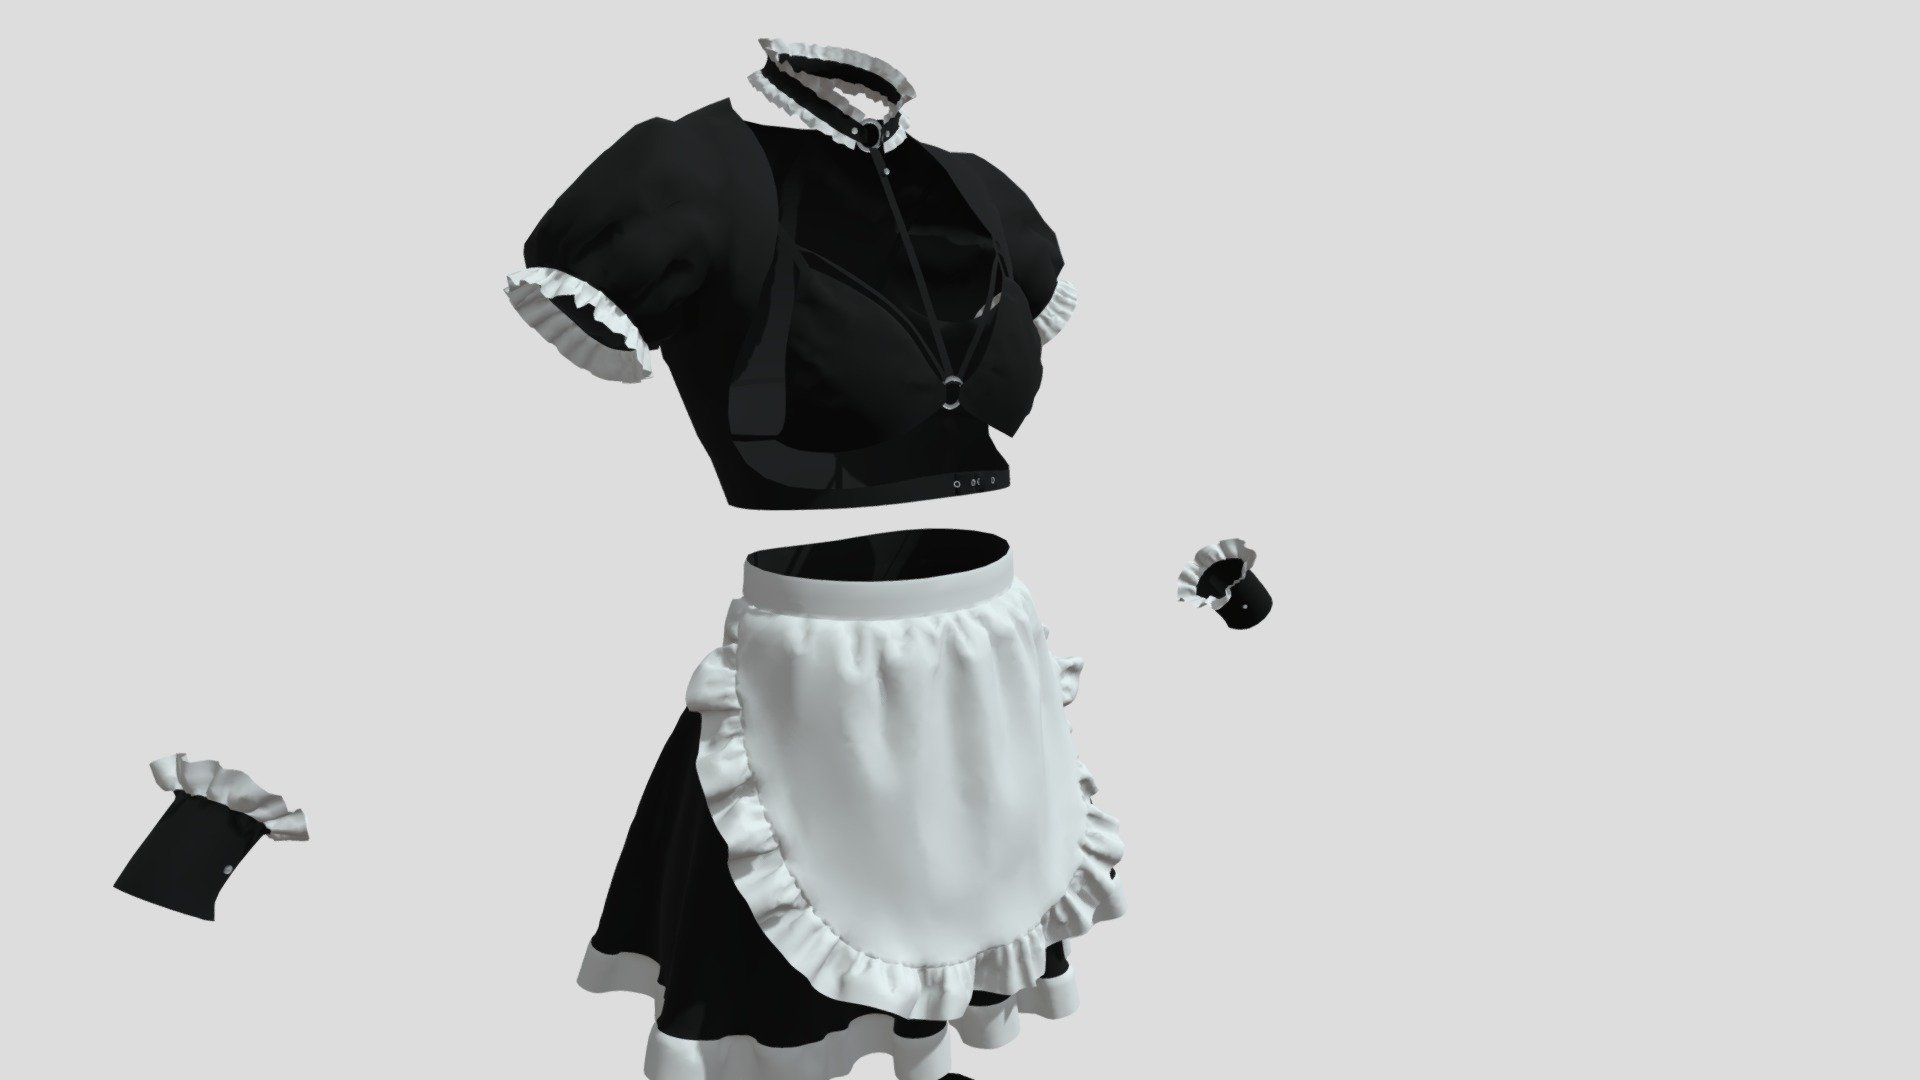 Sexy Maid Oufit 3d Model By Kittiekate [7e75988] Sketchfab